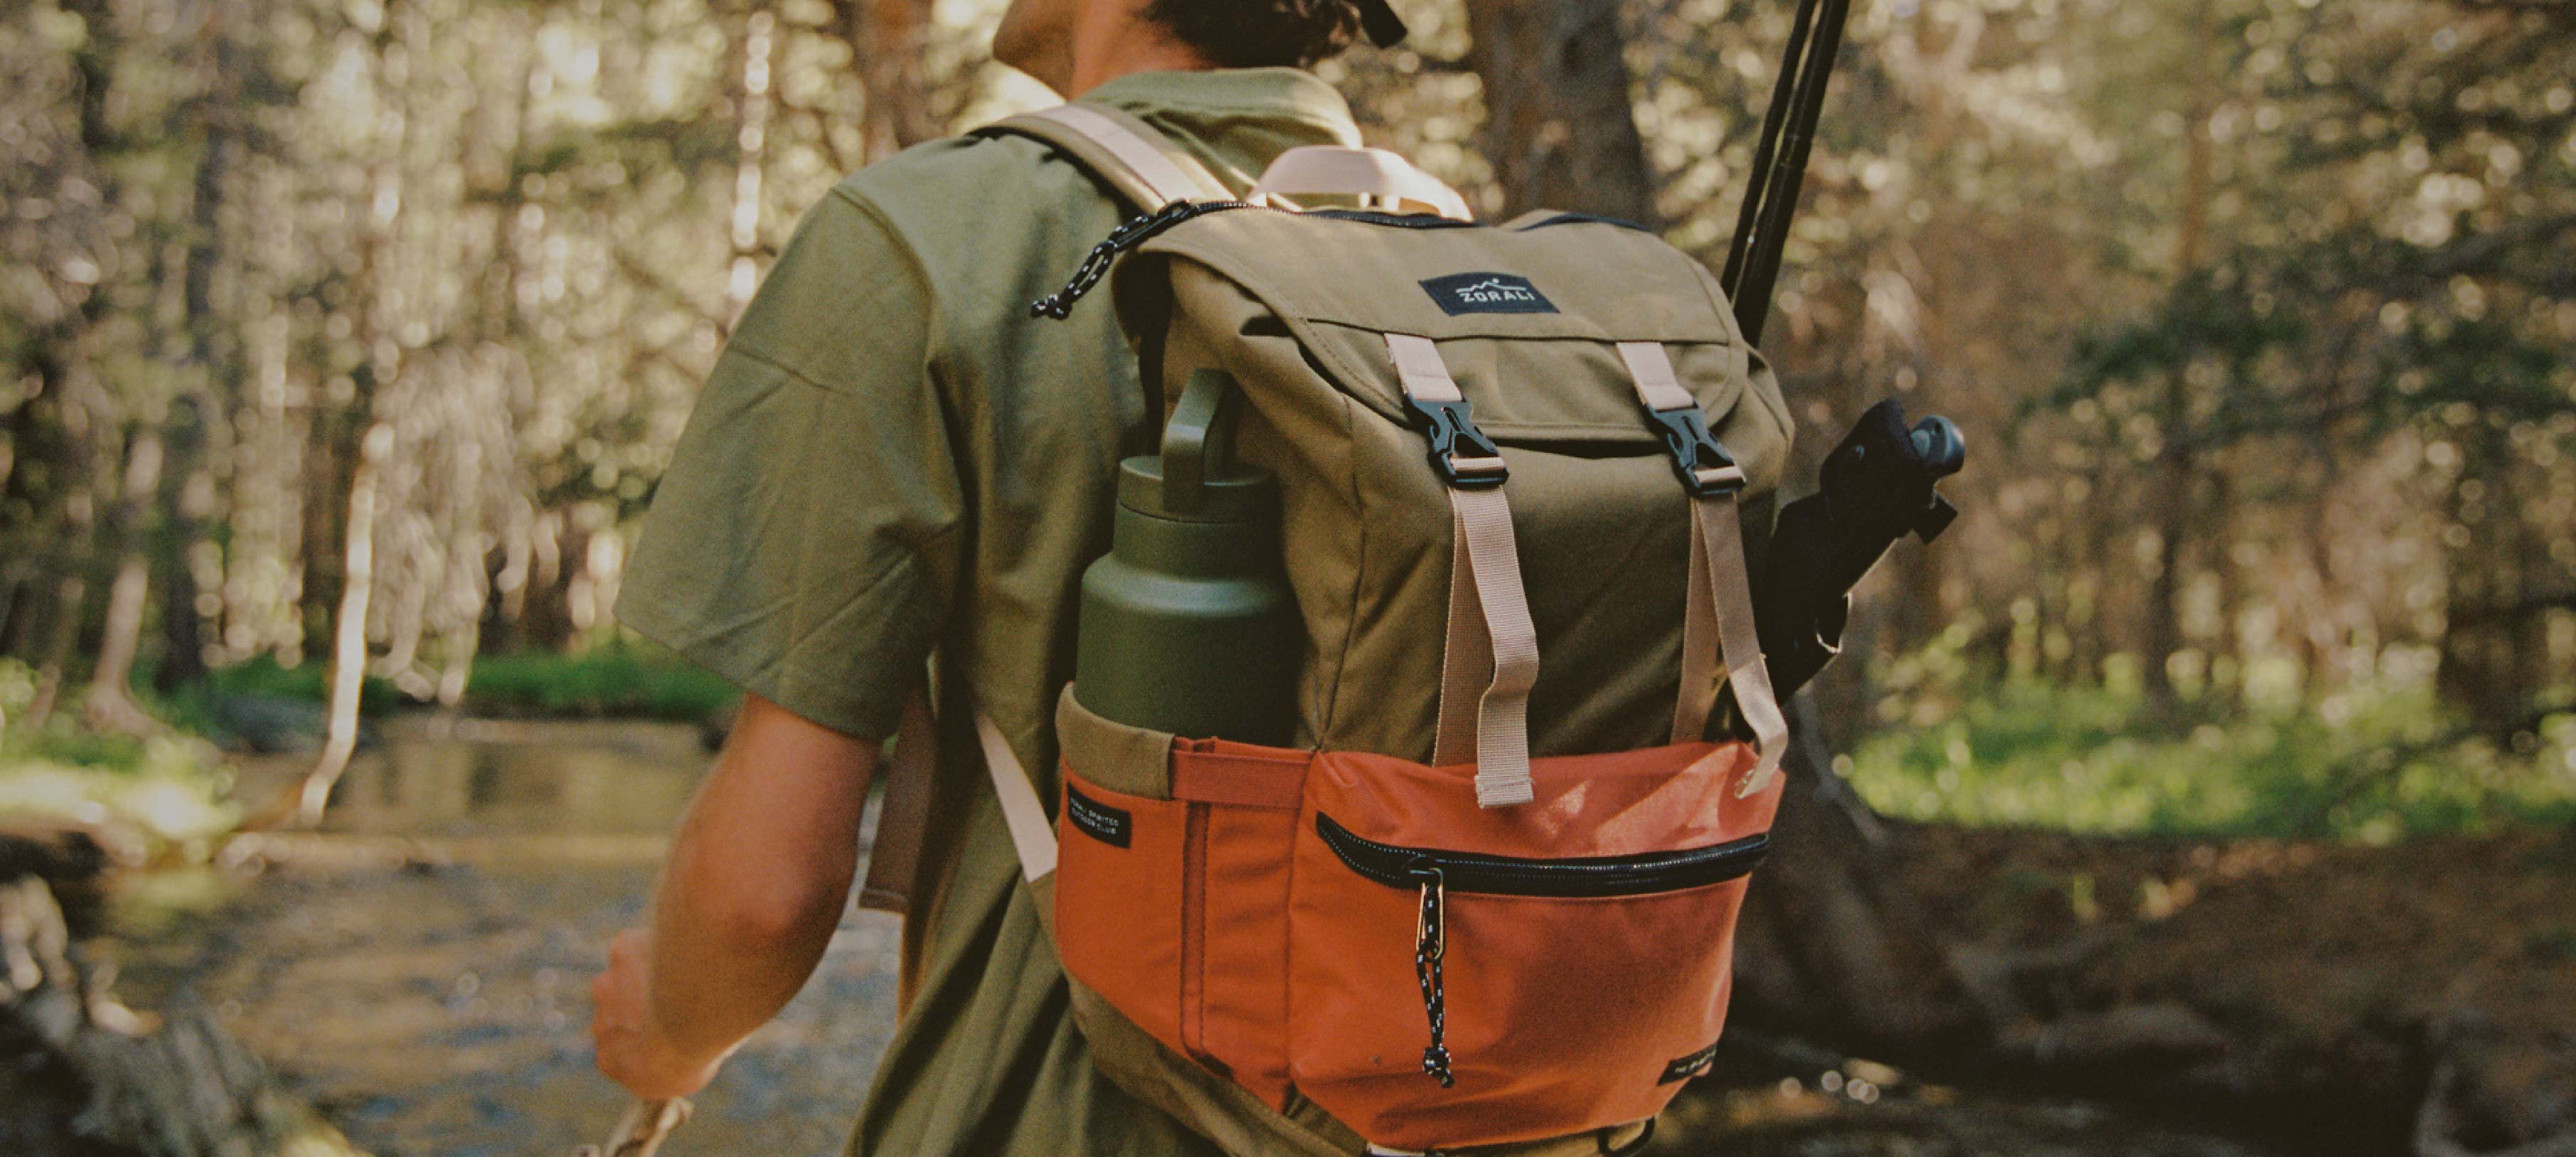 What to wear hiking: 12 items to build your outdoor wardrobe